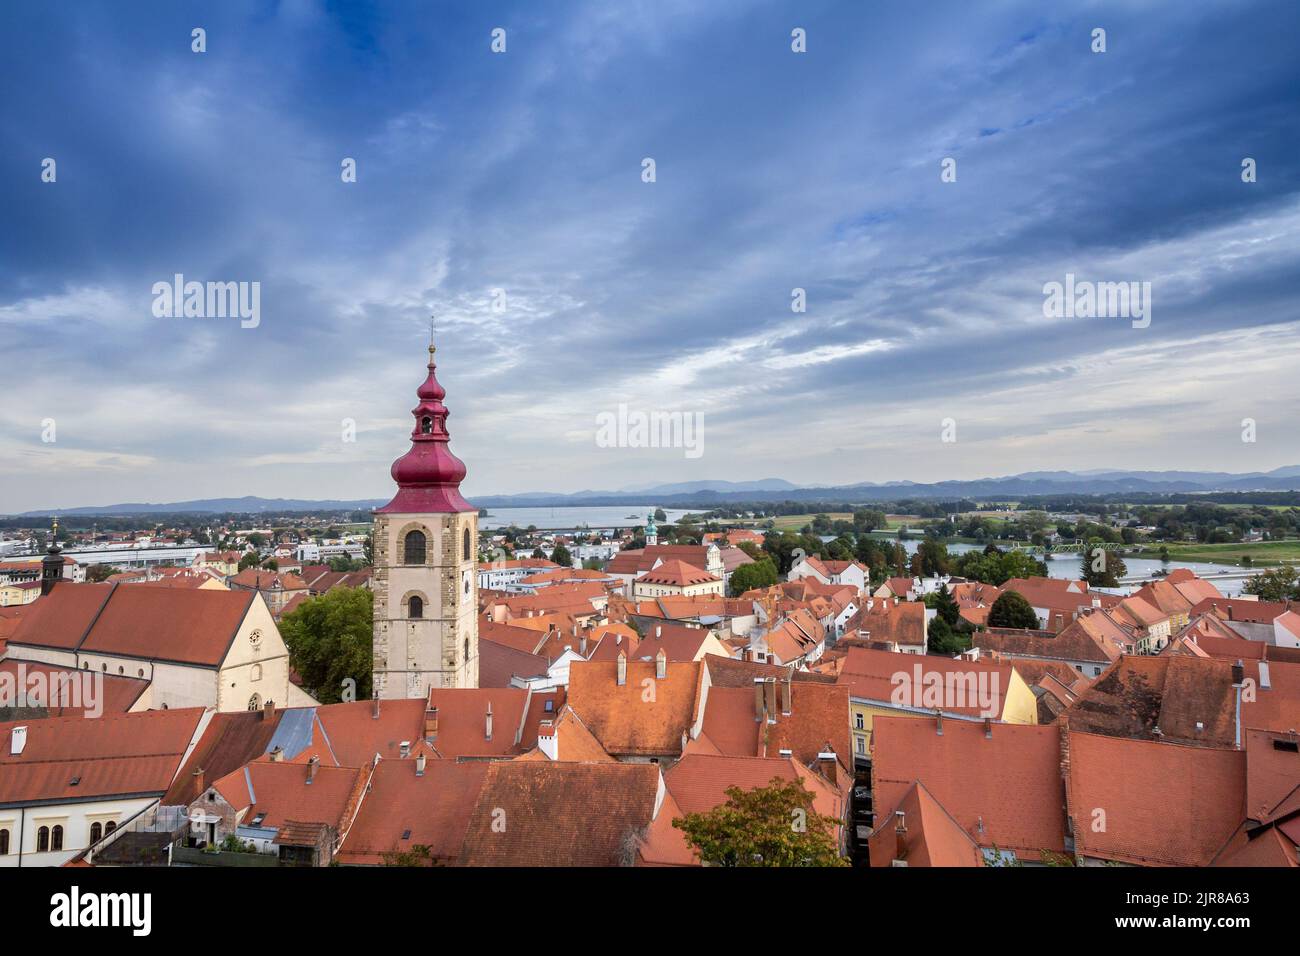 Picture of the landscape of Ptuj seen from above. Ptuj is a town in northeastern Slovenia that is the seat of the Municipality of Ptuj. Ptuj, the olde Stock Photo